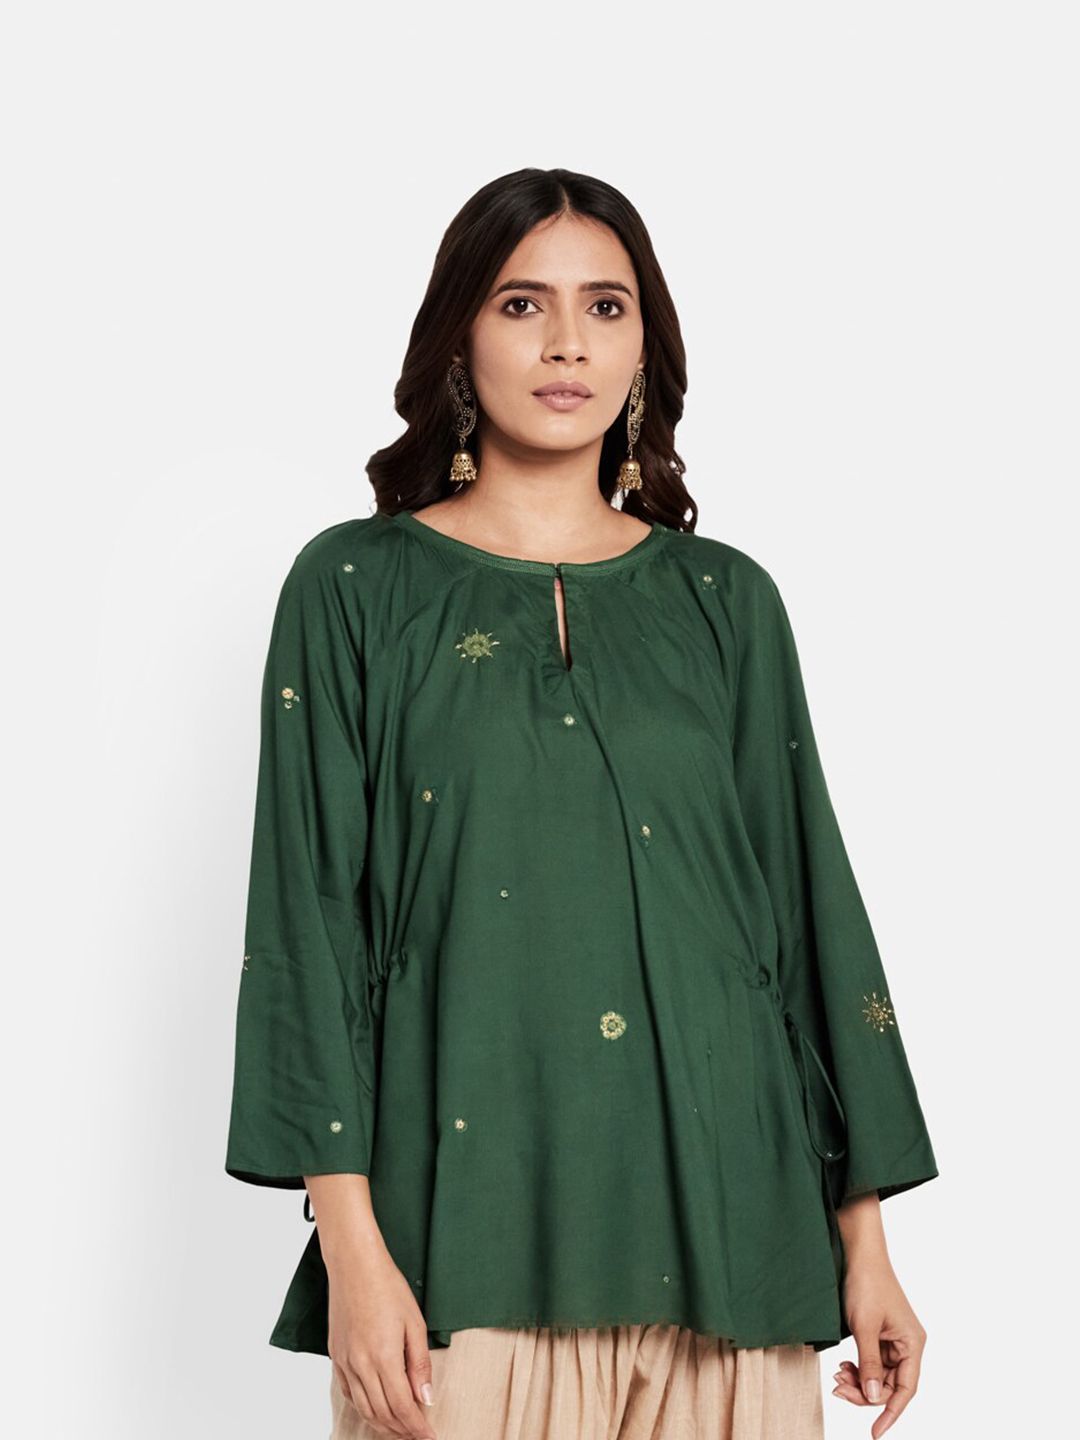 Fabindia Green Embellished Embroidered Keyhole Modal Neck Top Price in India